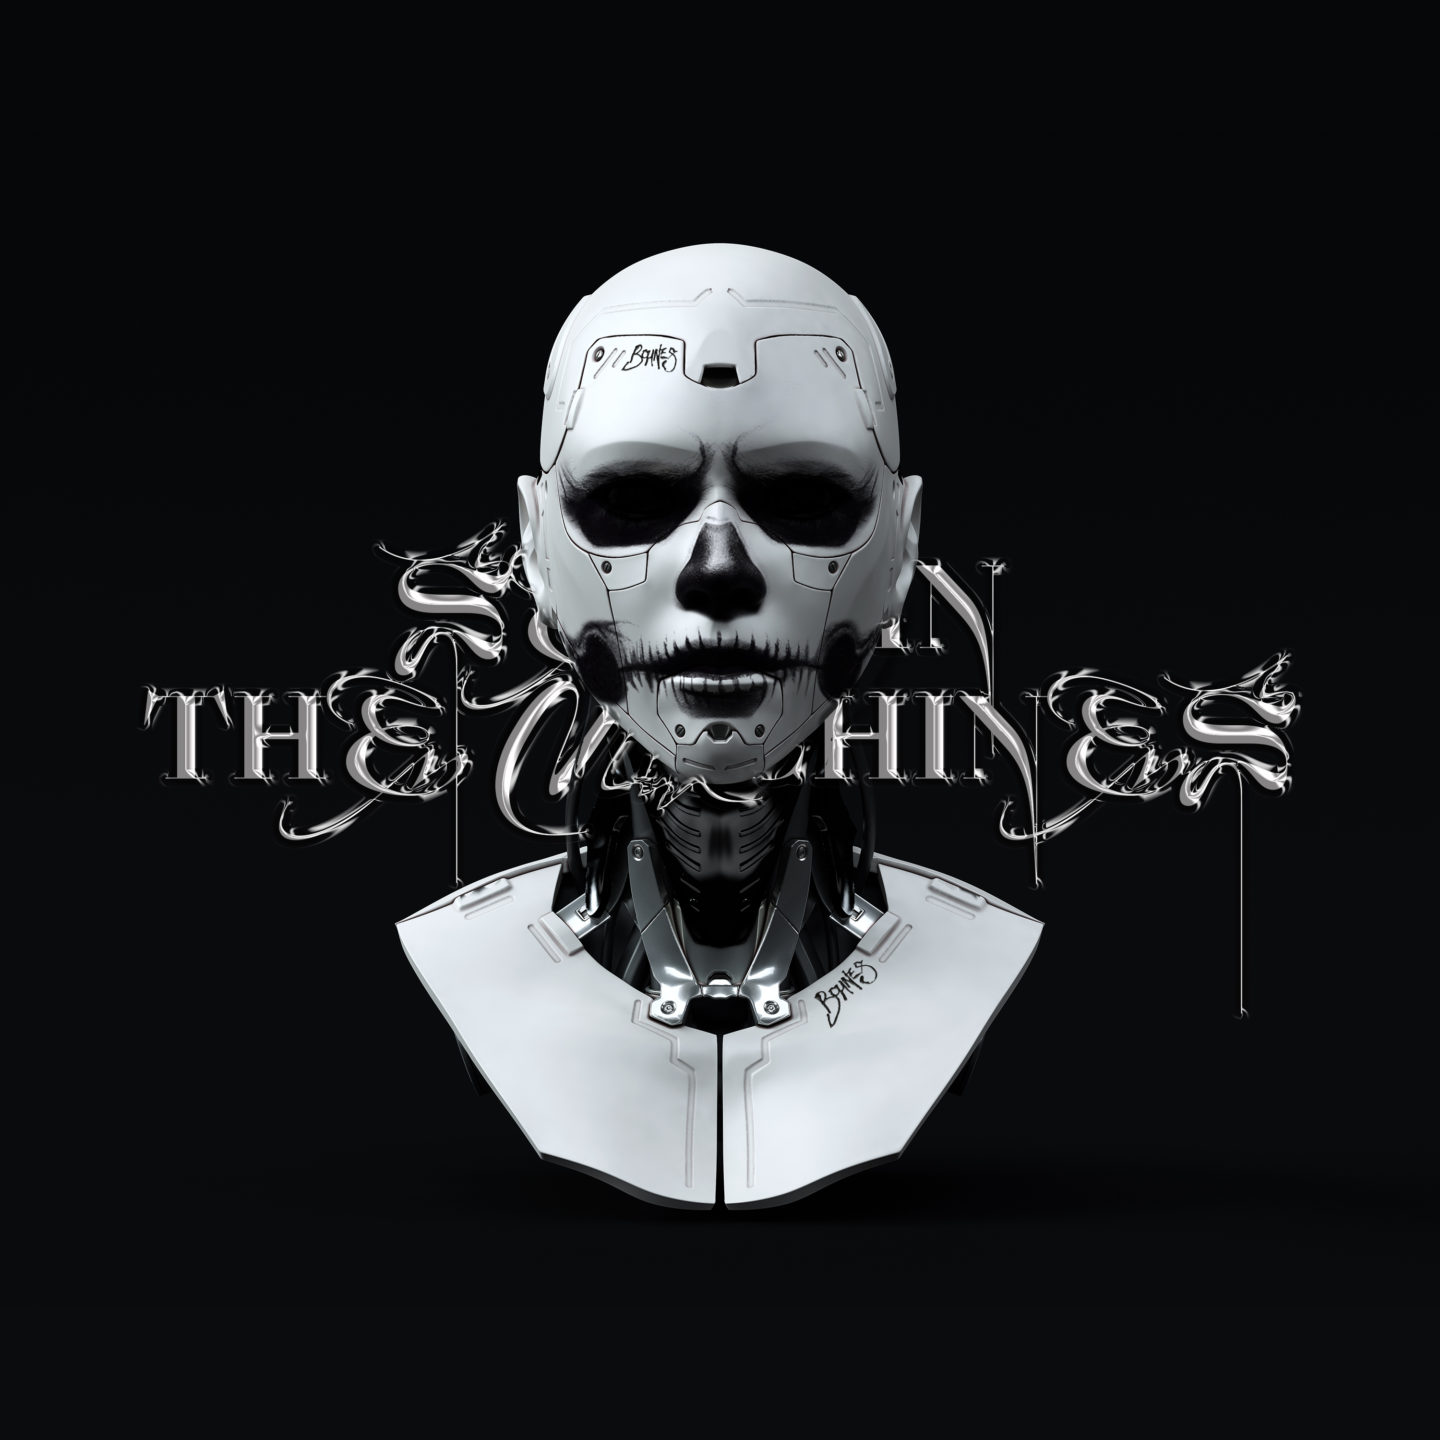 Black and white single cover with skeleton image